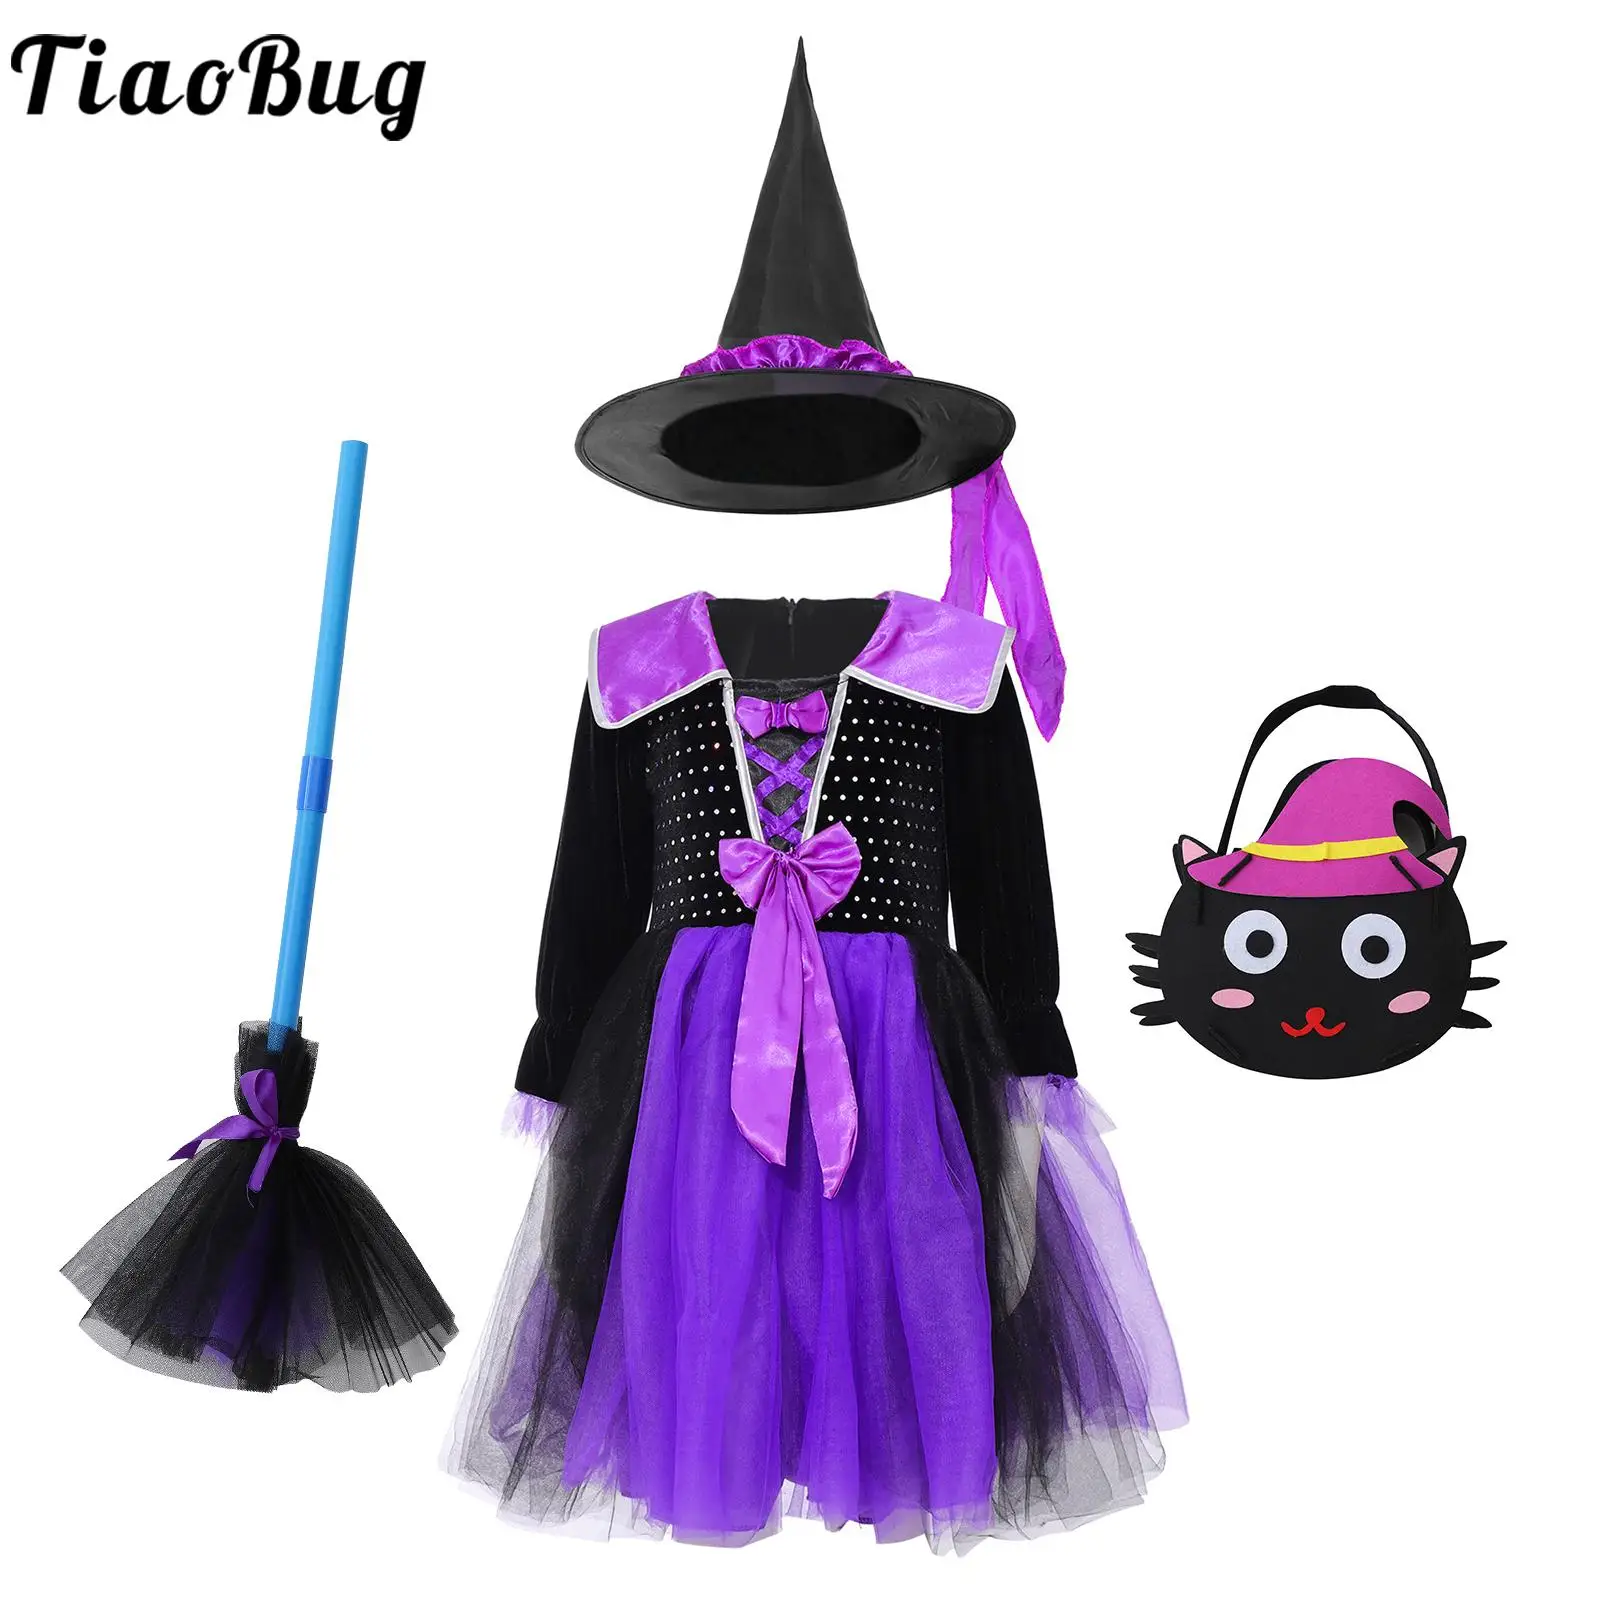 

Kids Girls Halloween Witch Cosplay Costume LED Light Up Dress with Witch Hat Broom Magic Bag for Theme Party Role Play Dress Up